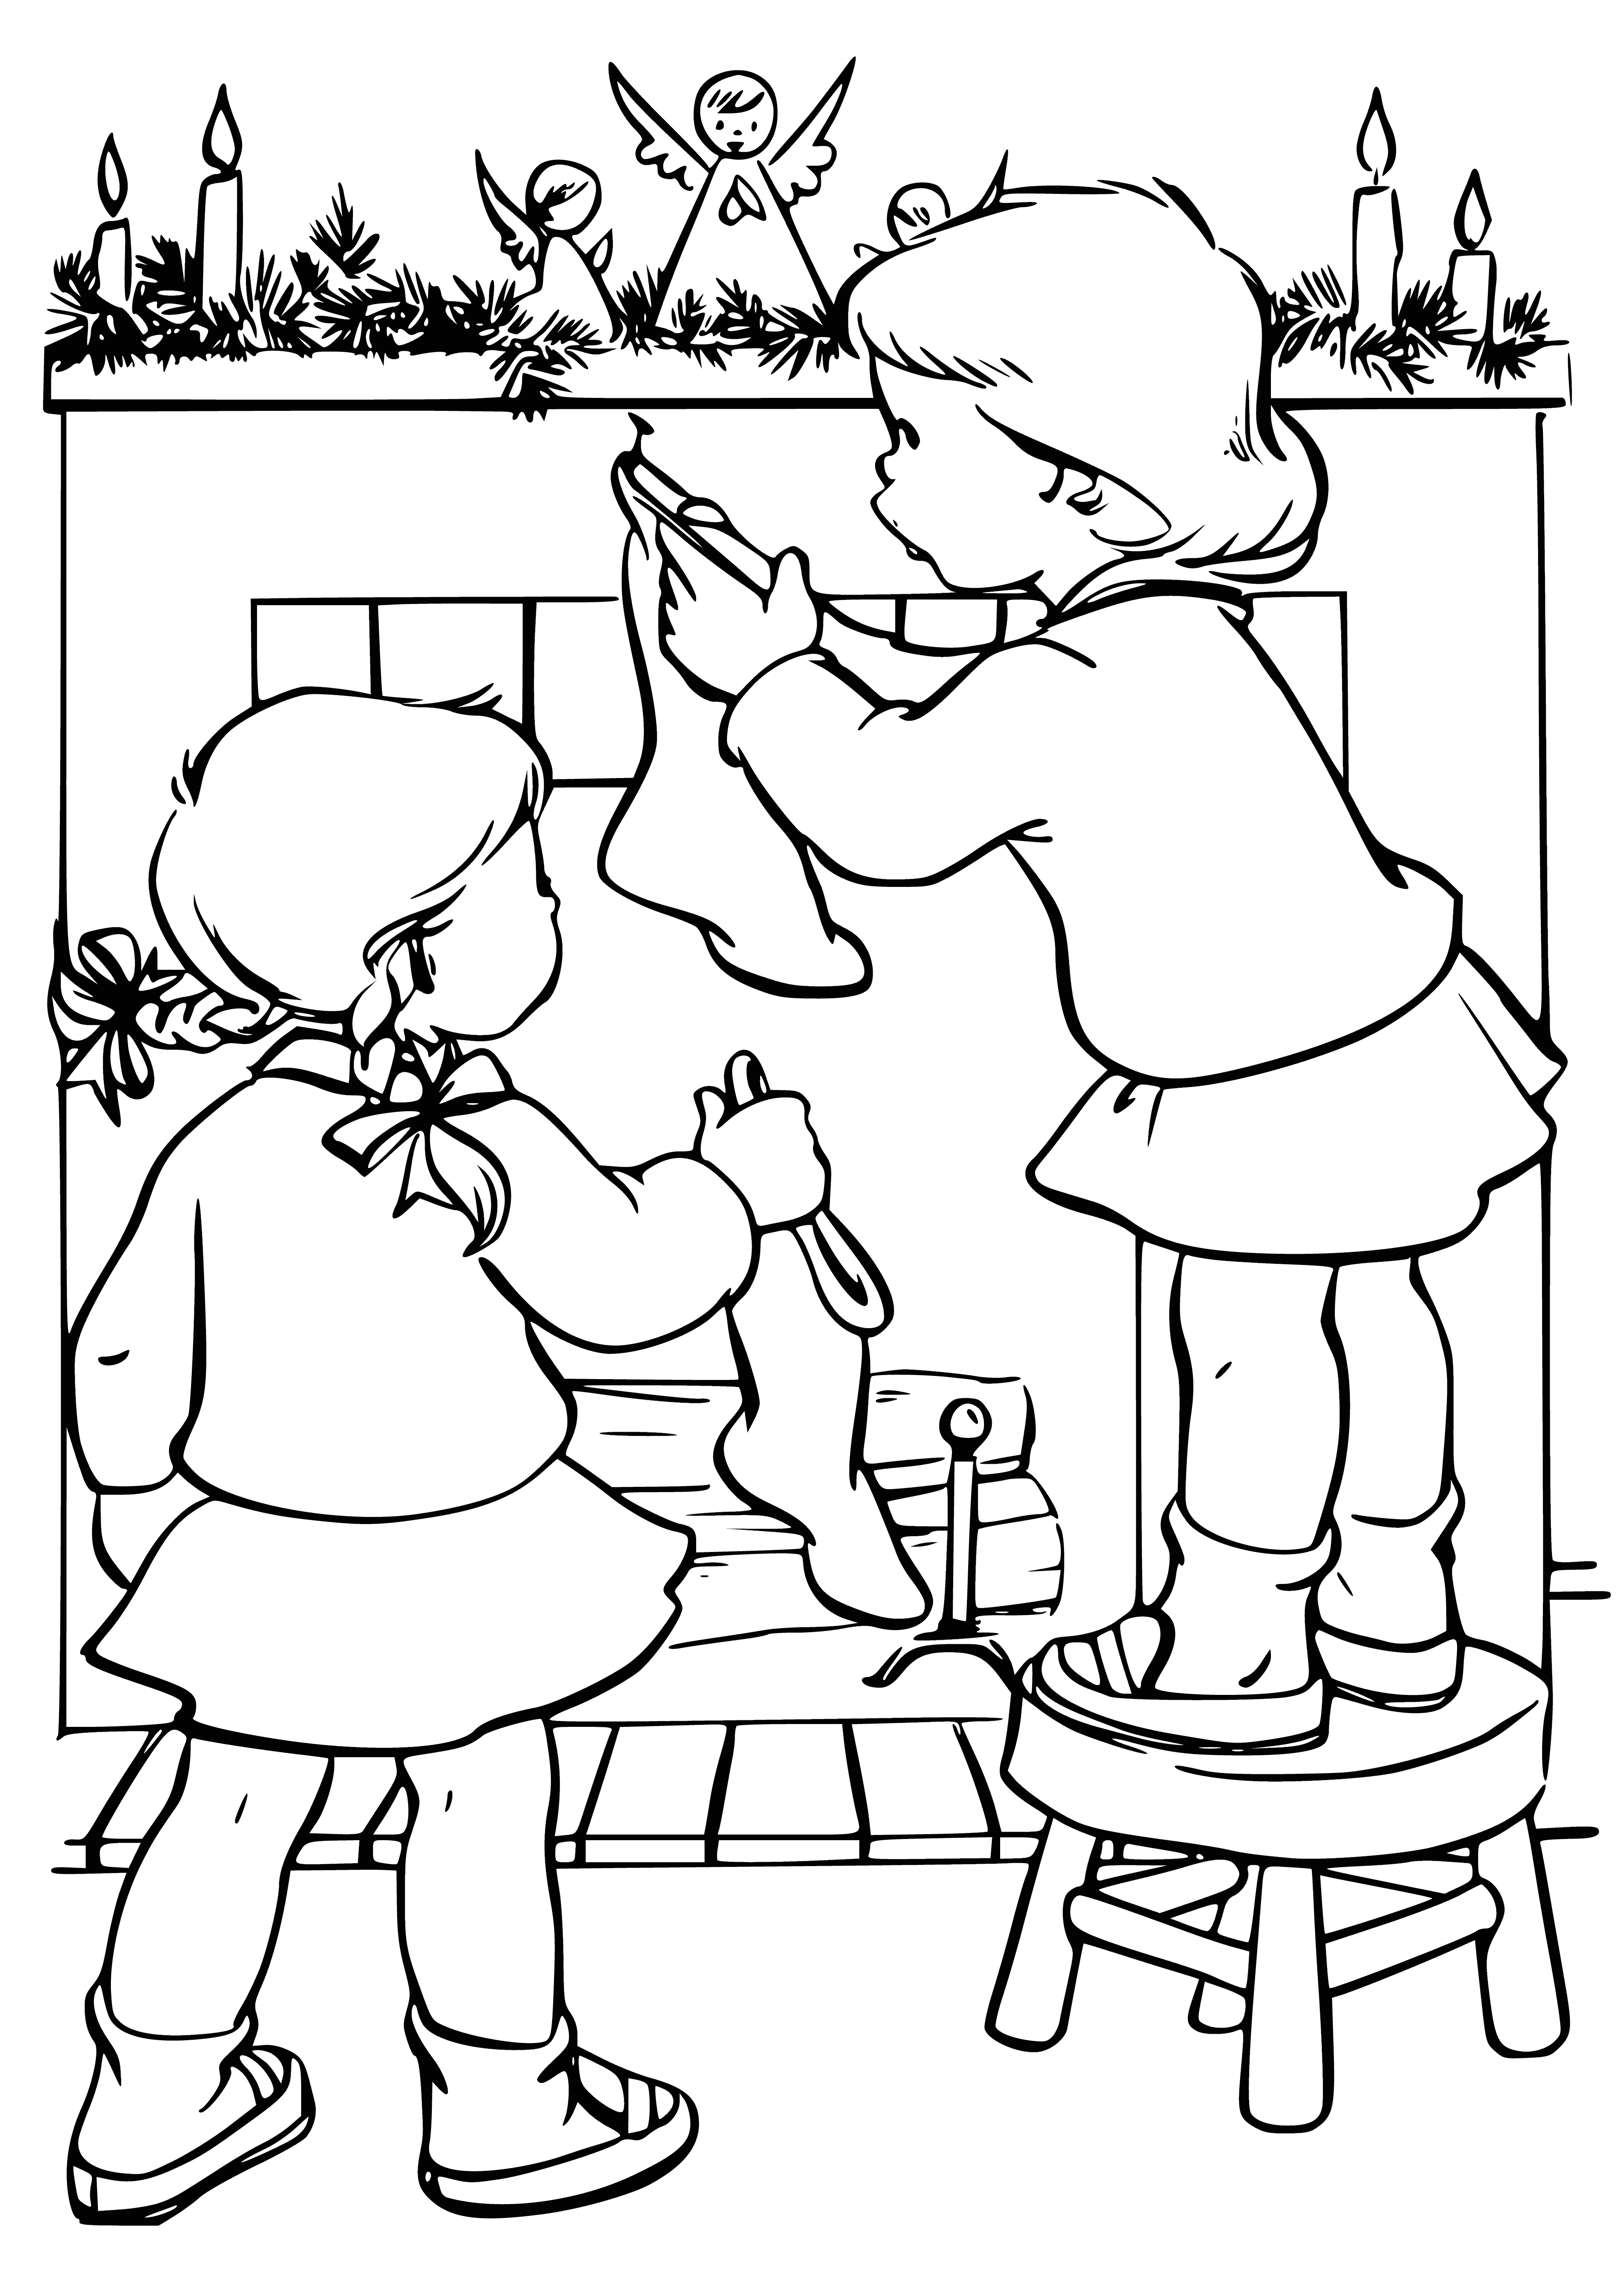 coloring page: -> Two Xmas socks hang, decorated w/ candy canes, gingerbread men, & holly - perfect for holiday cheer!